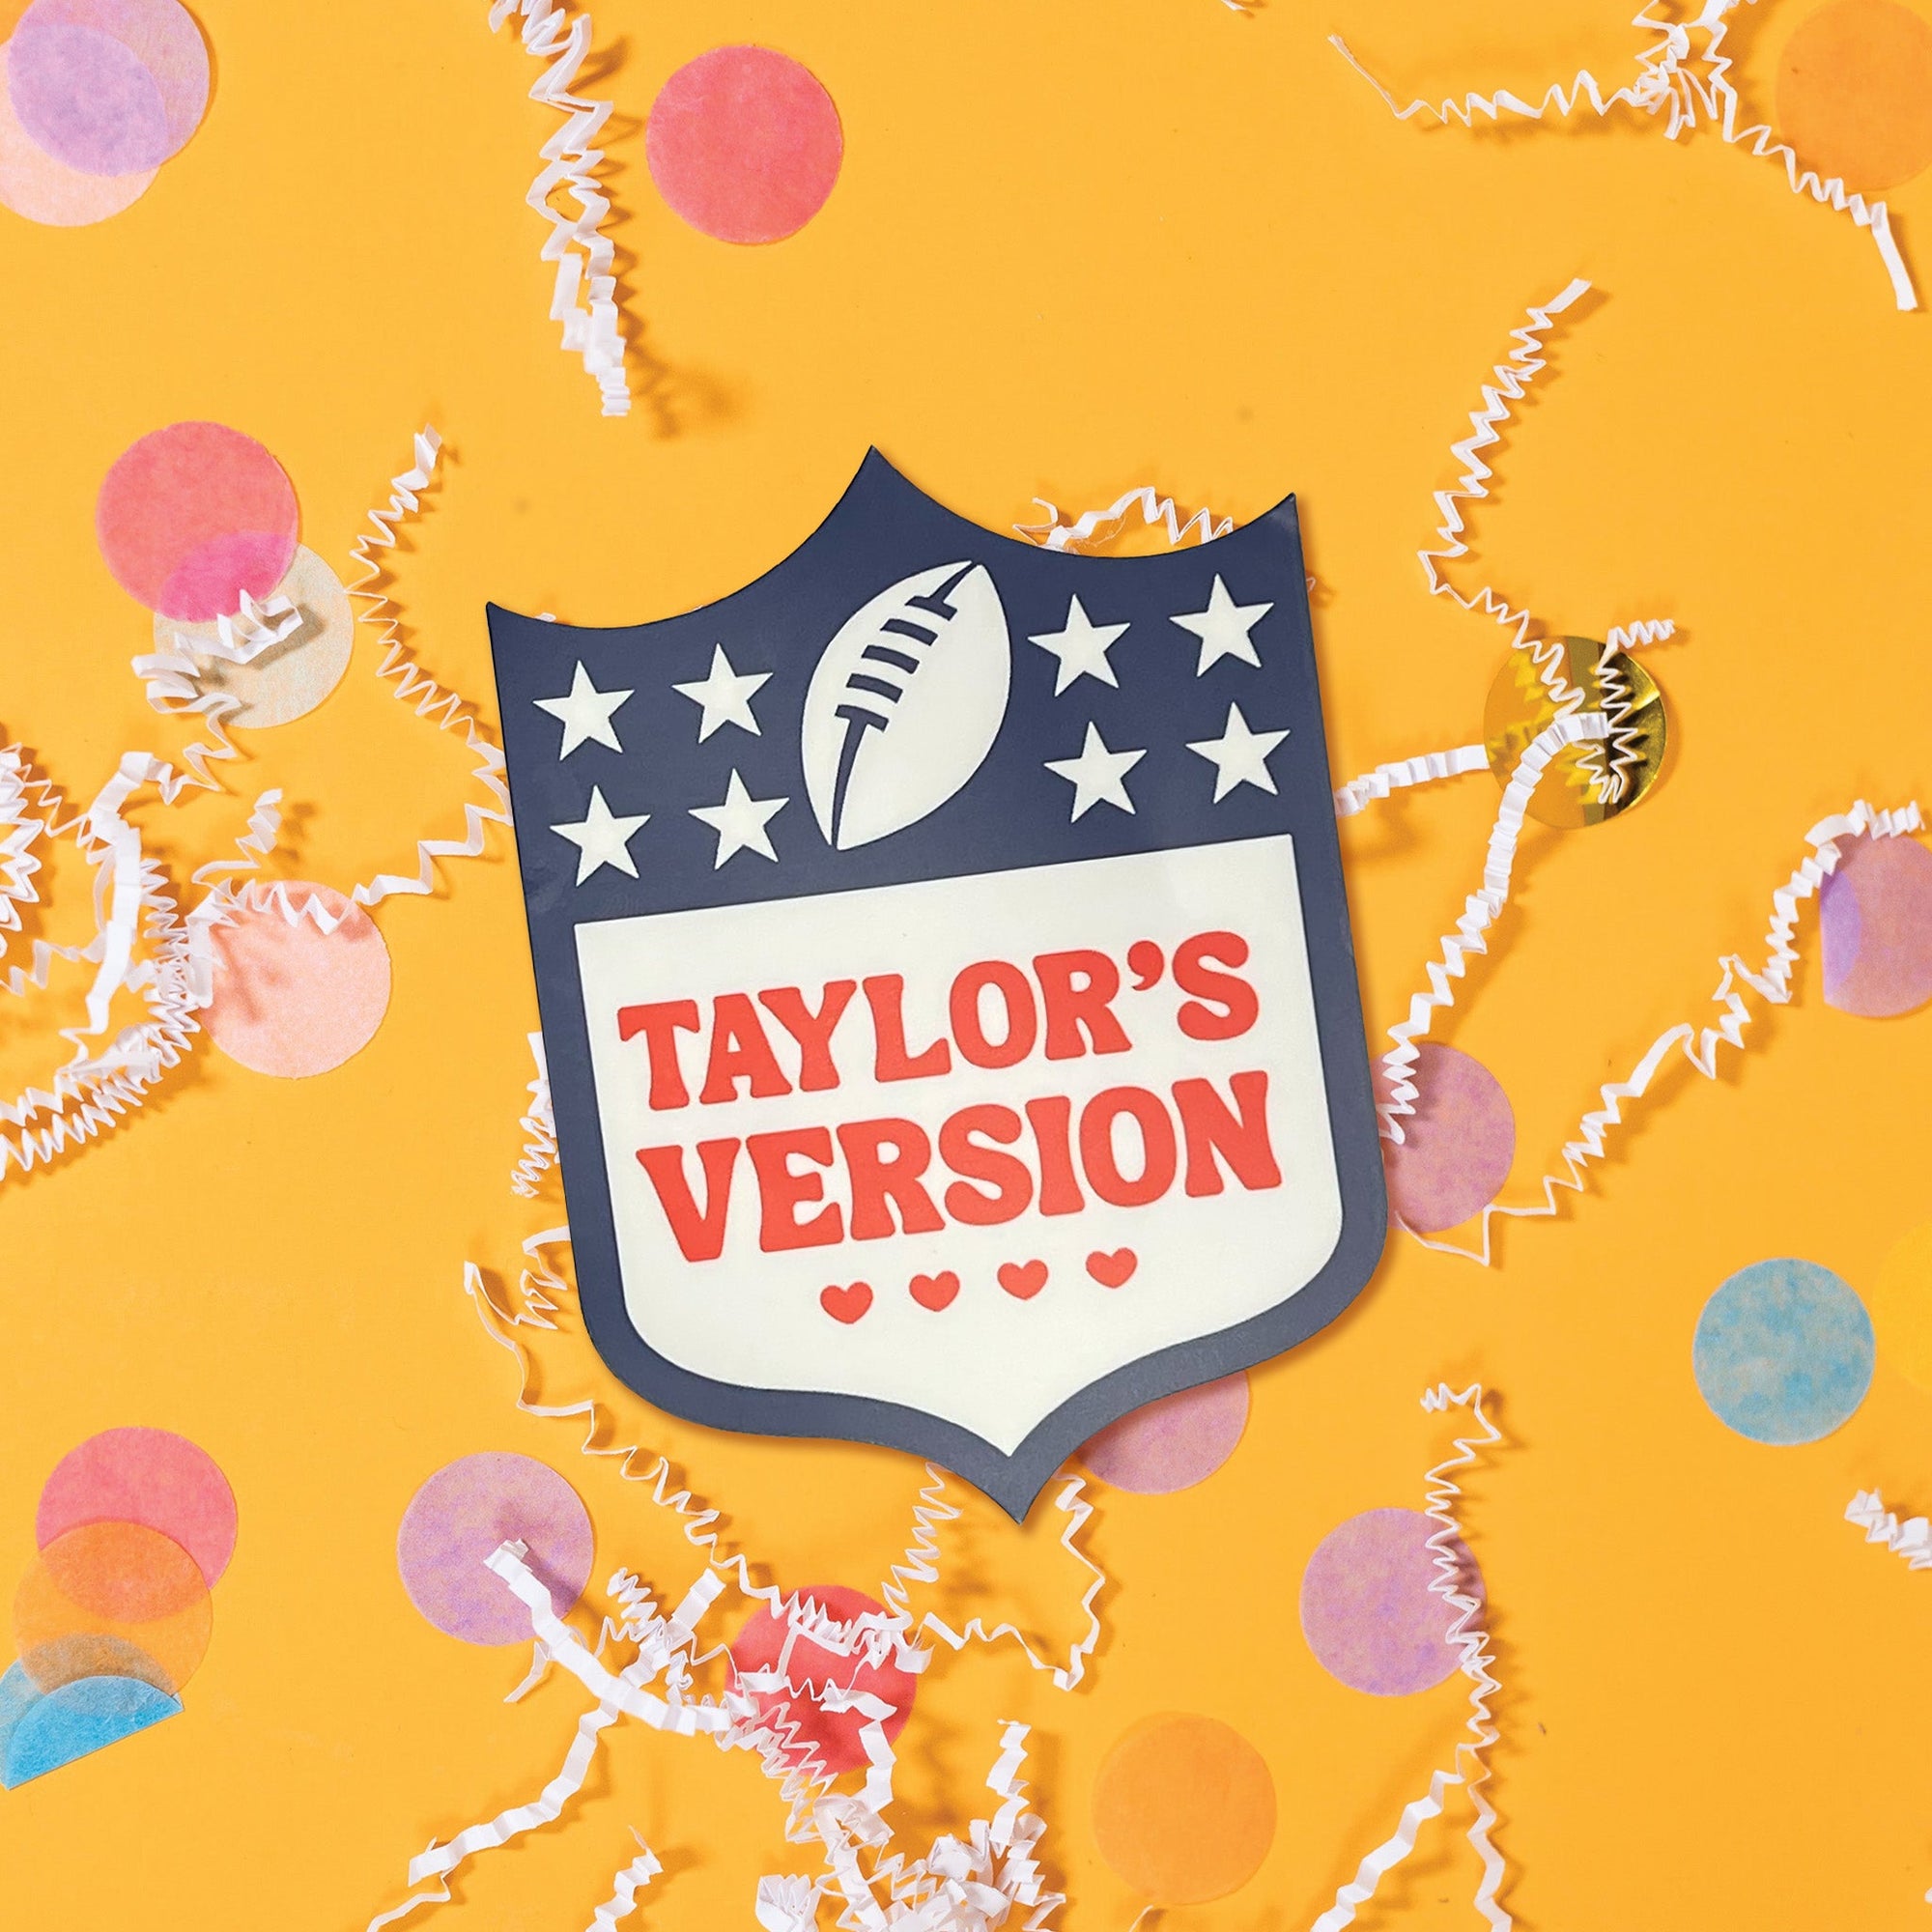 On a hot pink background sits a mug on top of a red and white striped packing tape with white crinkle and big, colorful confetti scattered around. There are mini disco balls. This NFL-Taylor Swift inspired mug has an NFL logo on the front and it says "TAYLOR'S VERSION" with four hearts under it. It is in red.